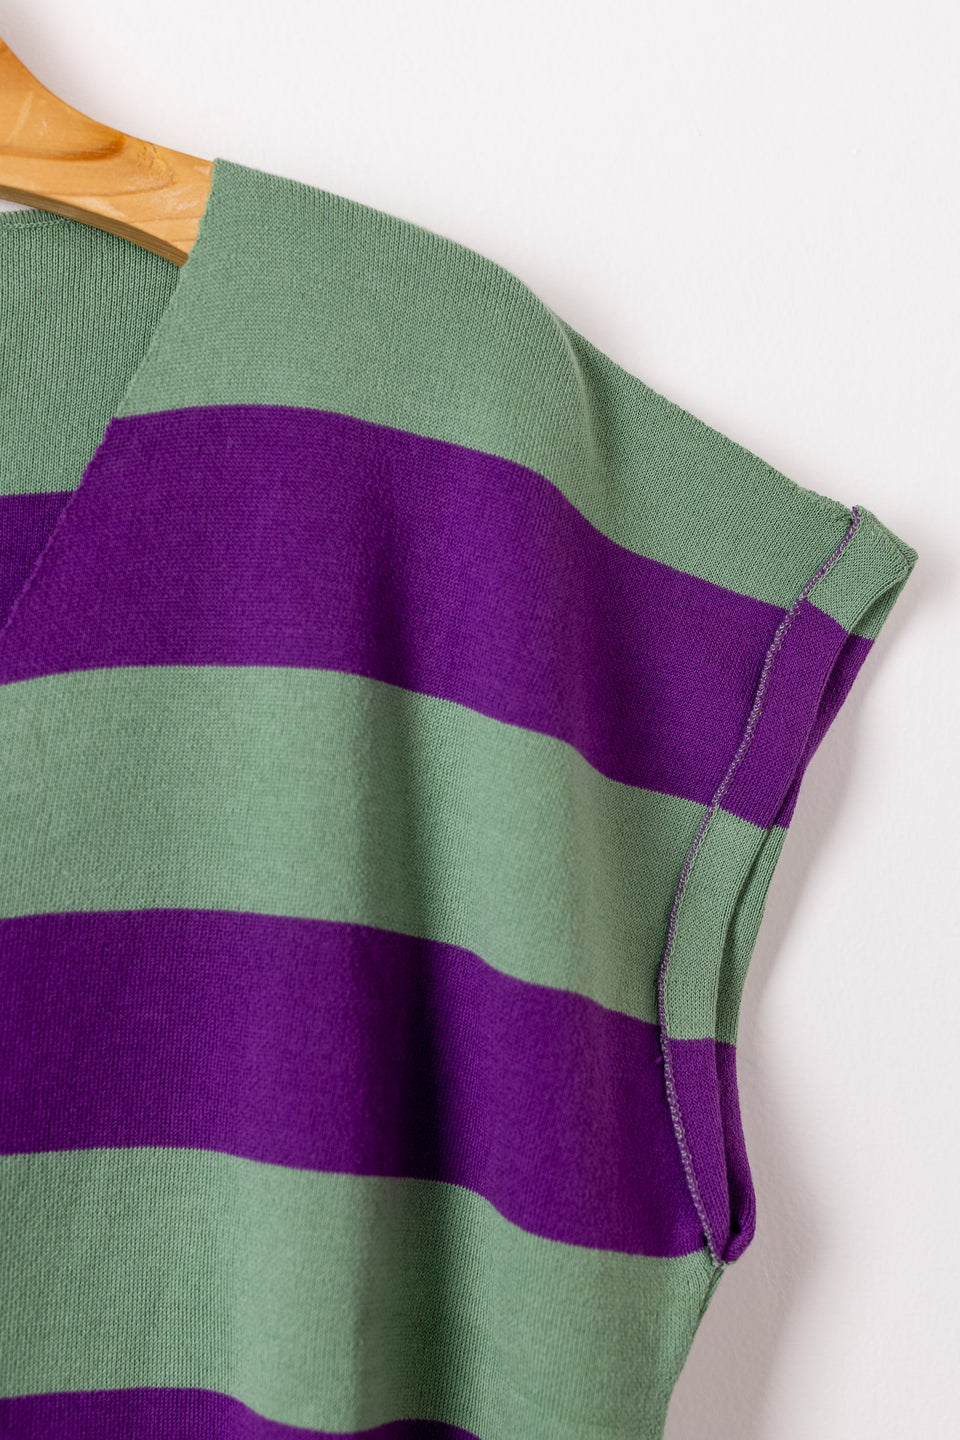 peace knit tshirt - striped water and purple 